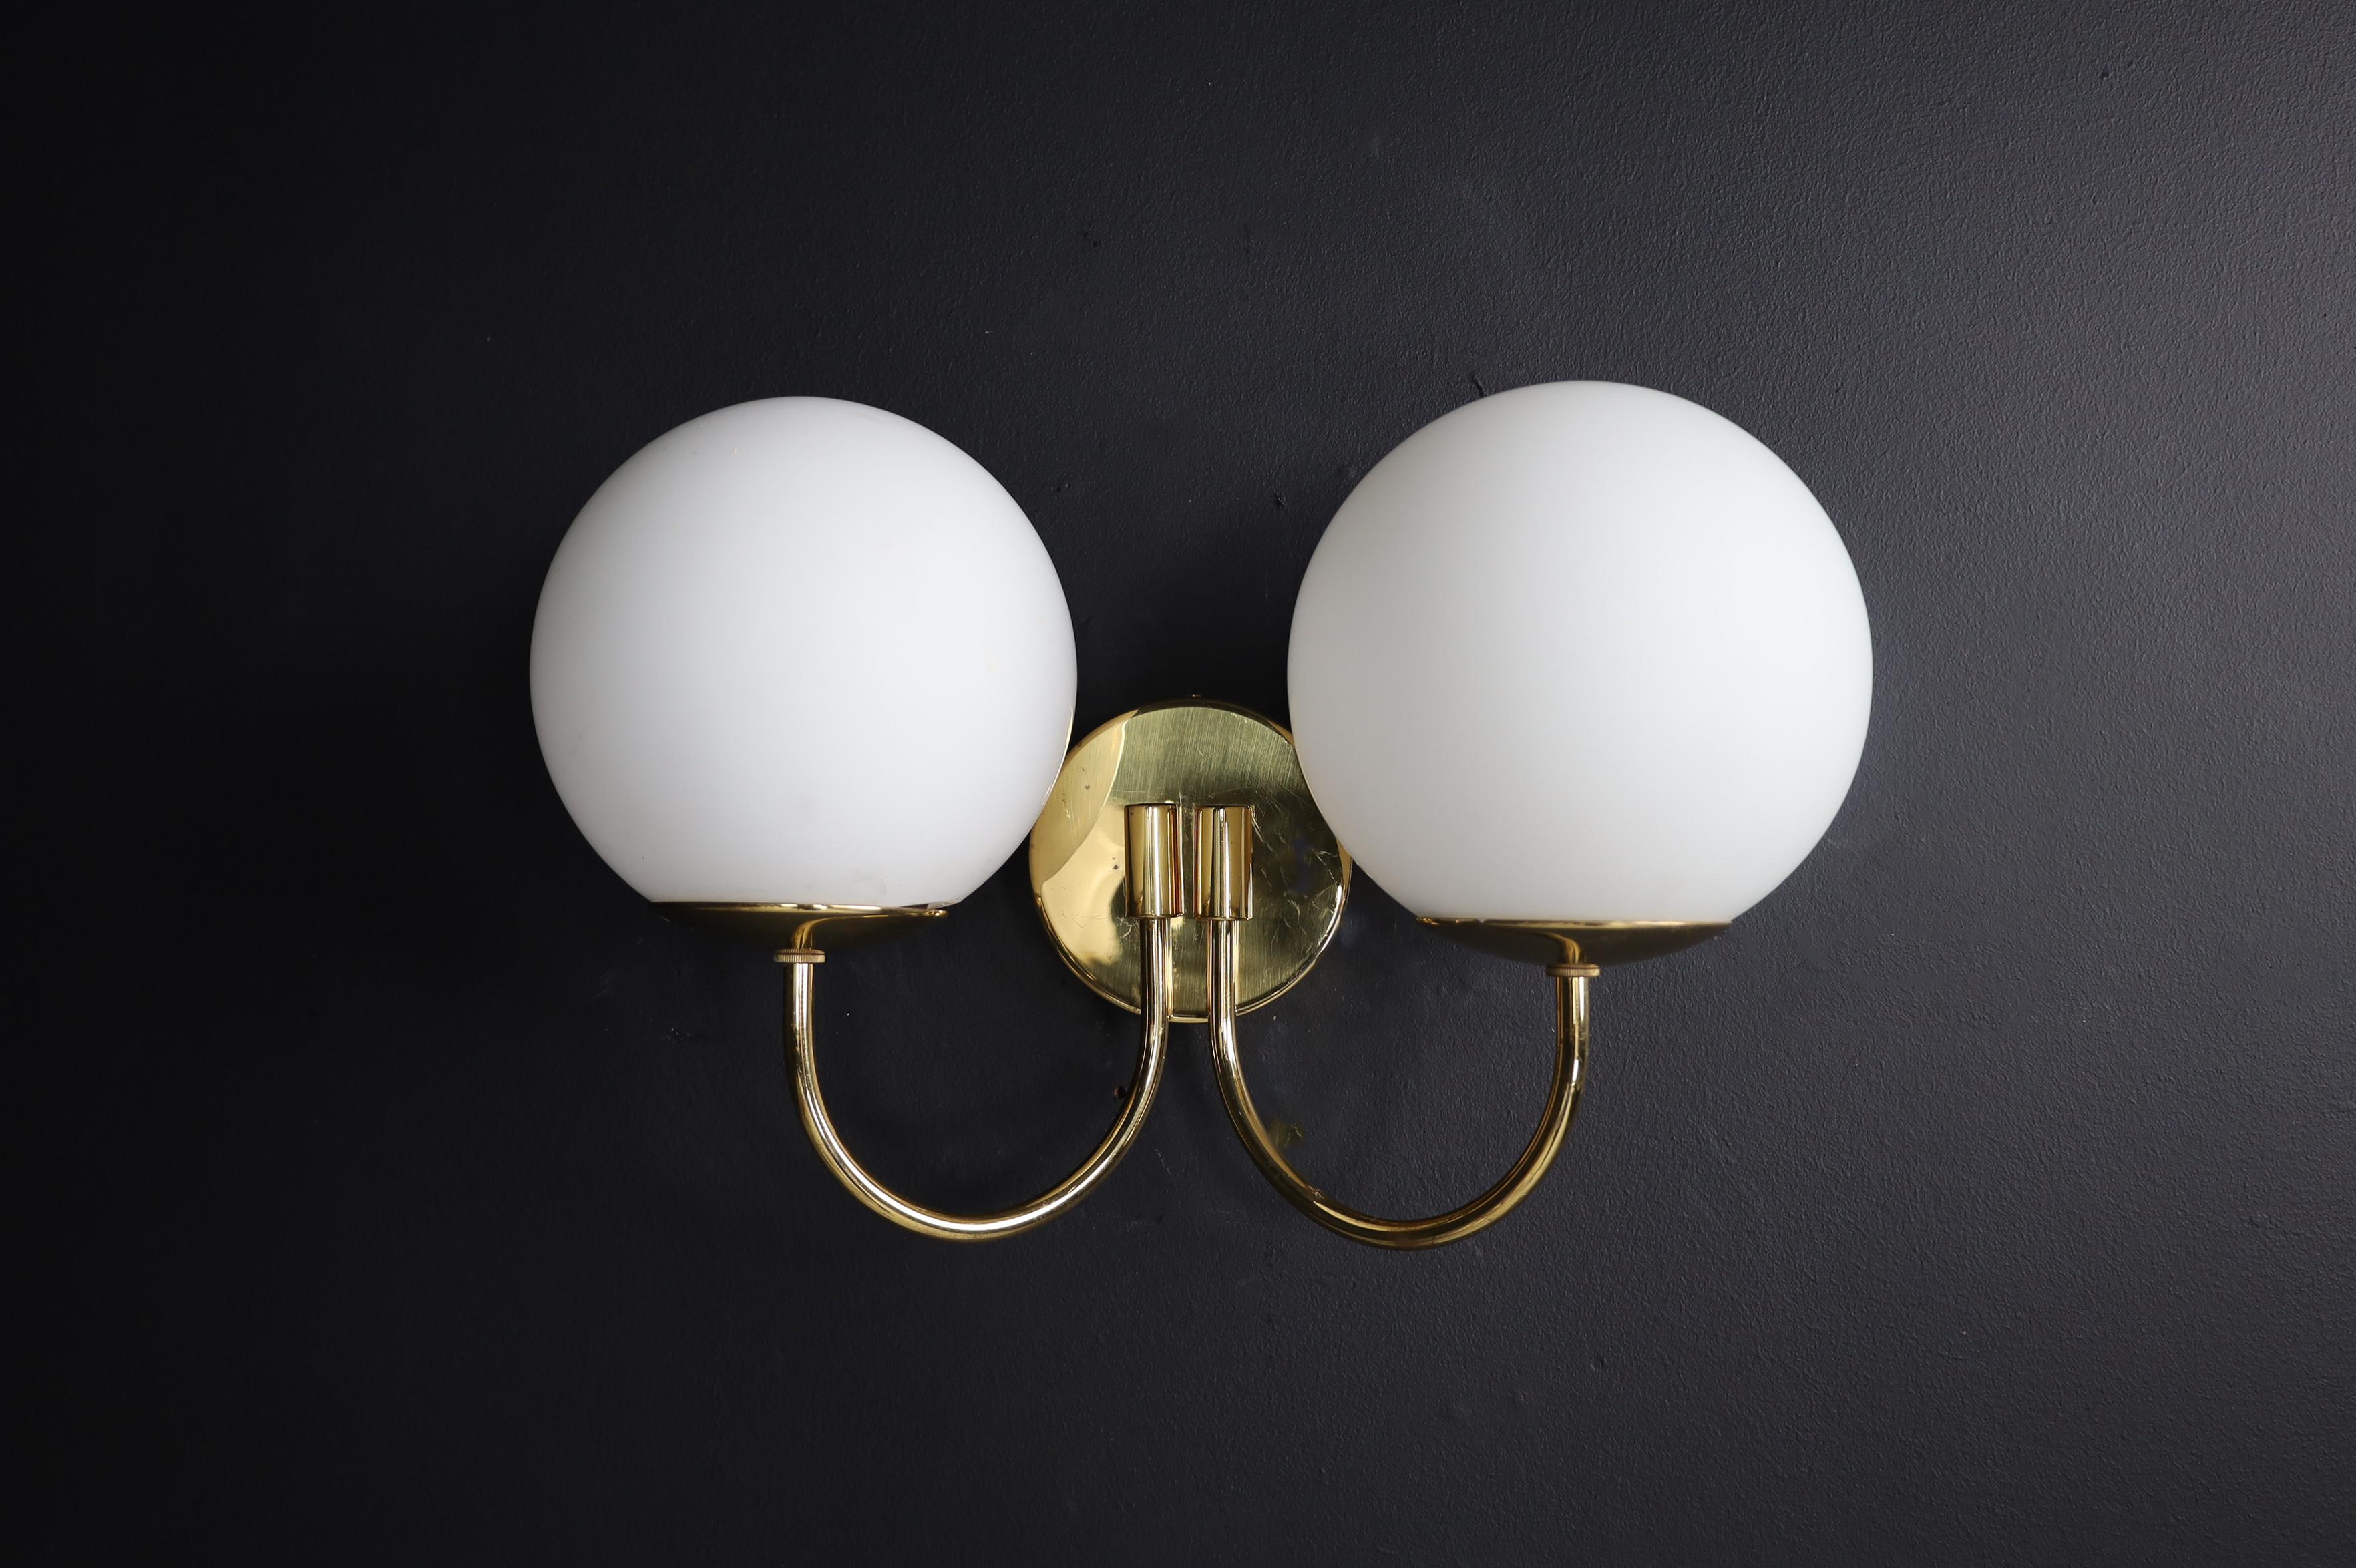 Italian Elegant Sconces with Brass Fixtures and Opaline Glass Globes, Italy, 1960s For Sale